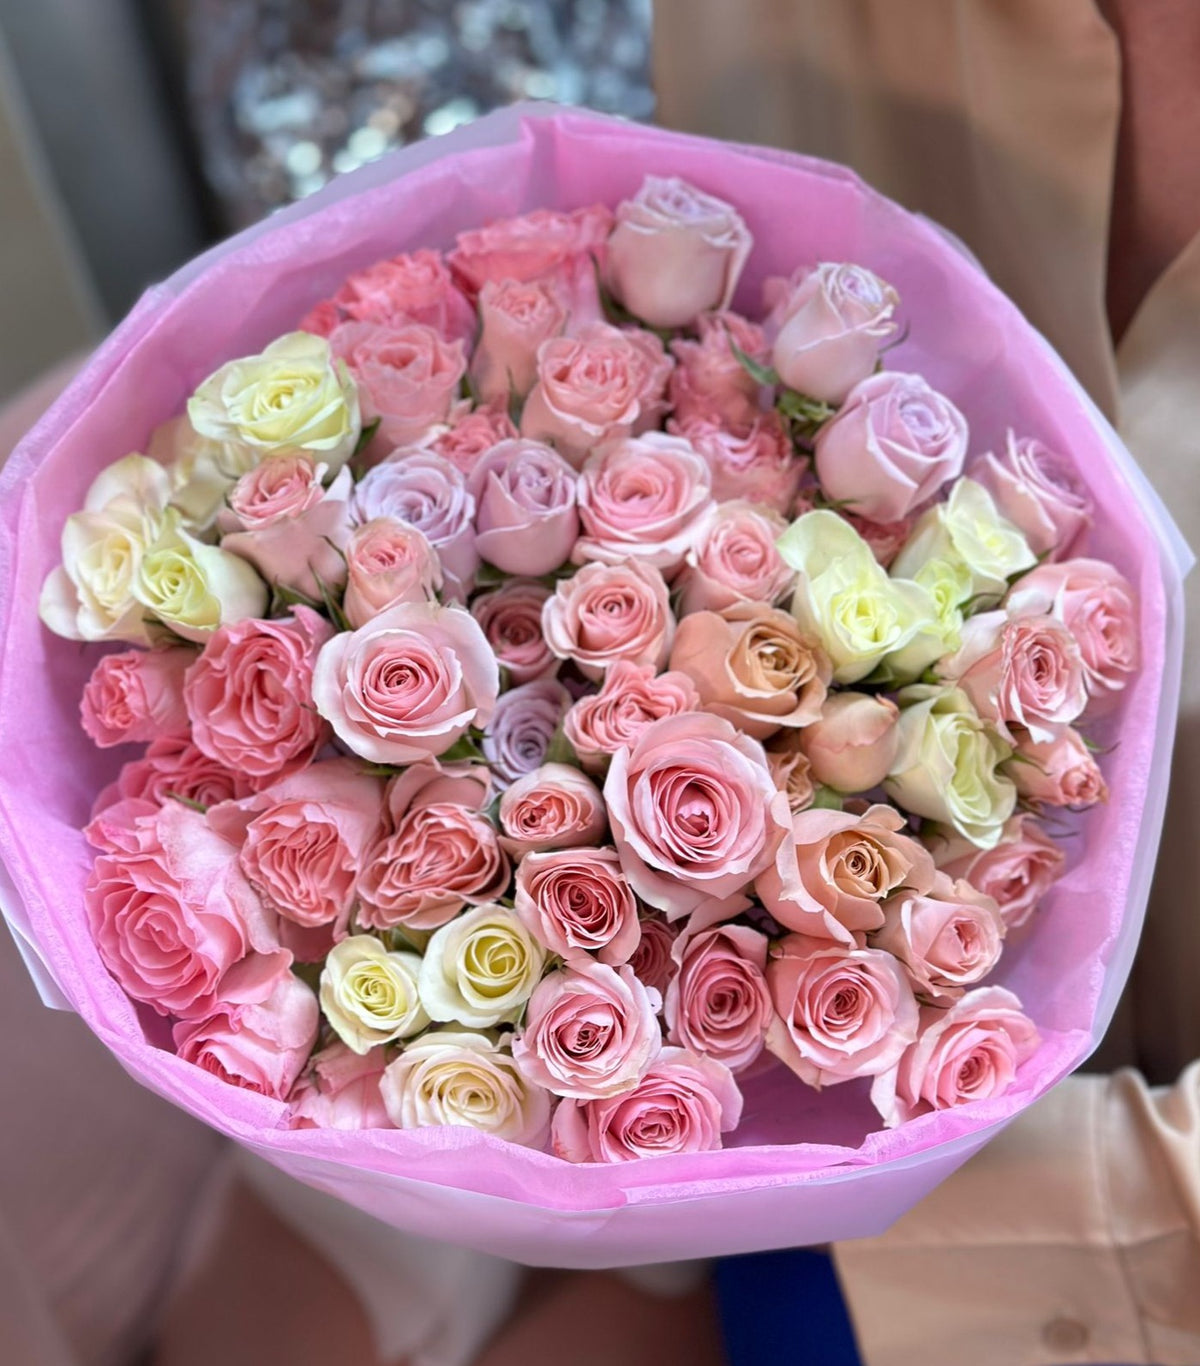 Bouquet of Spray Roses